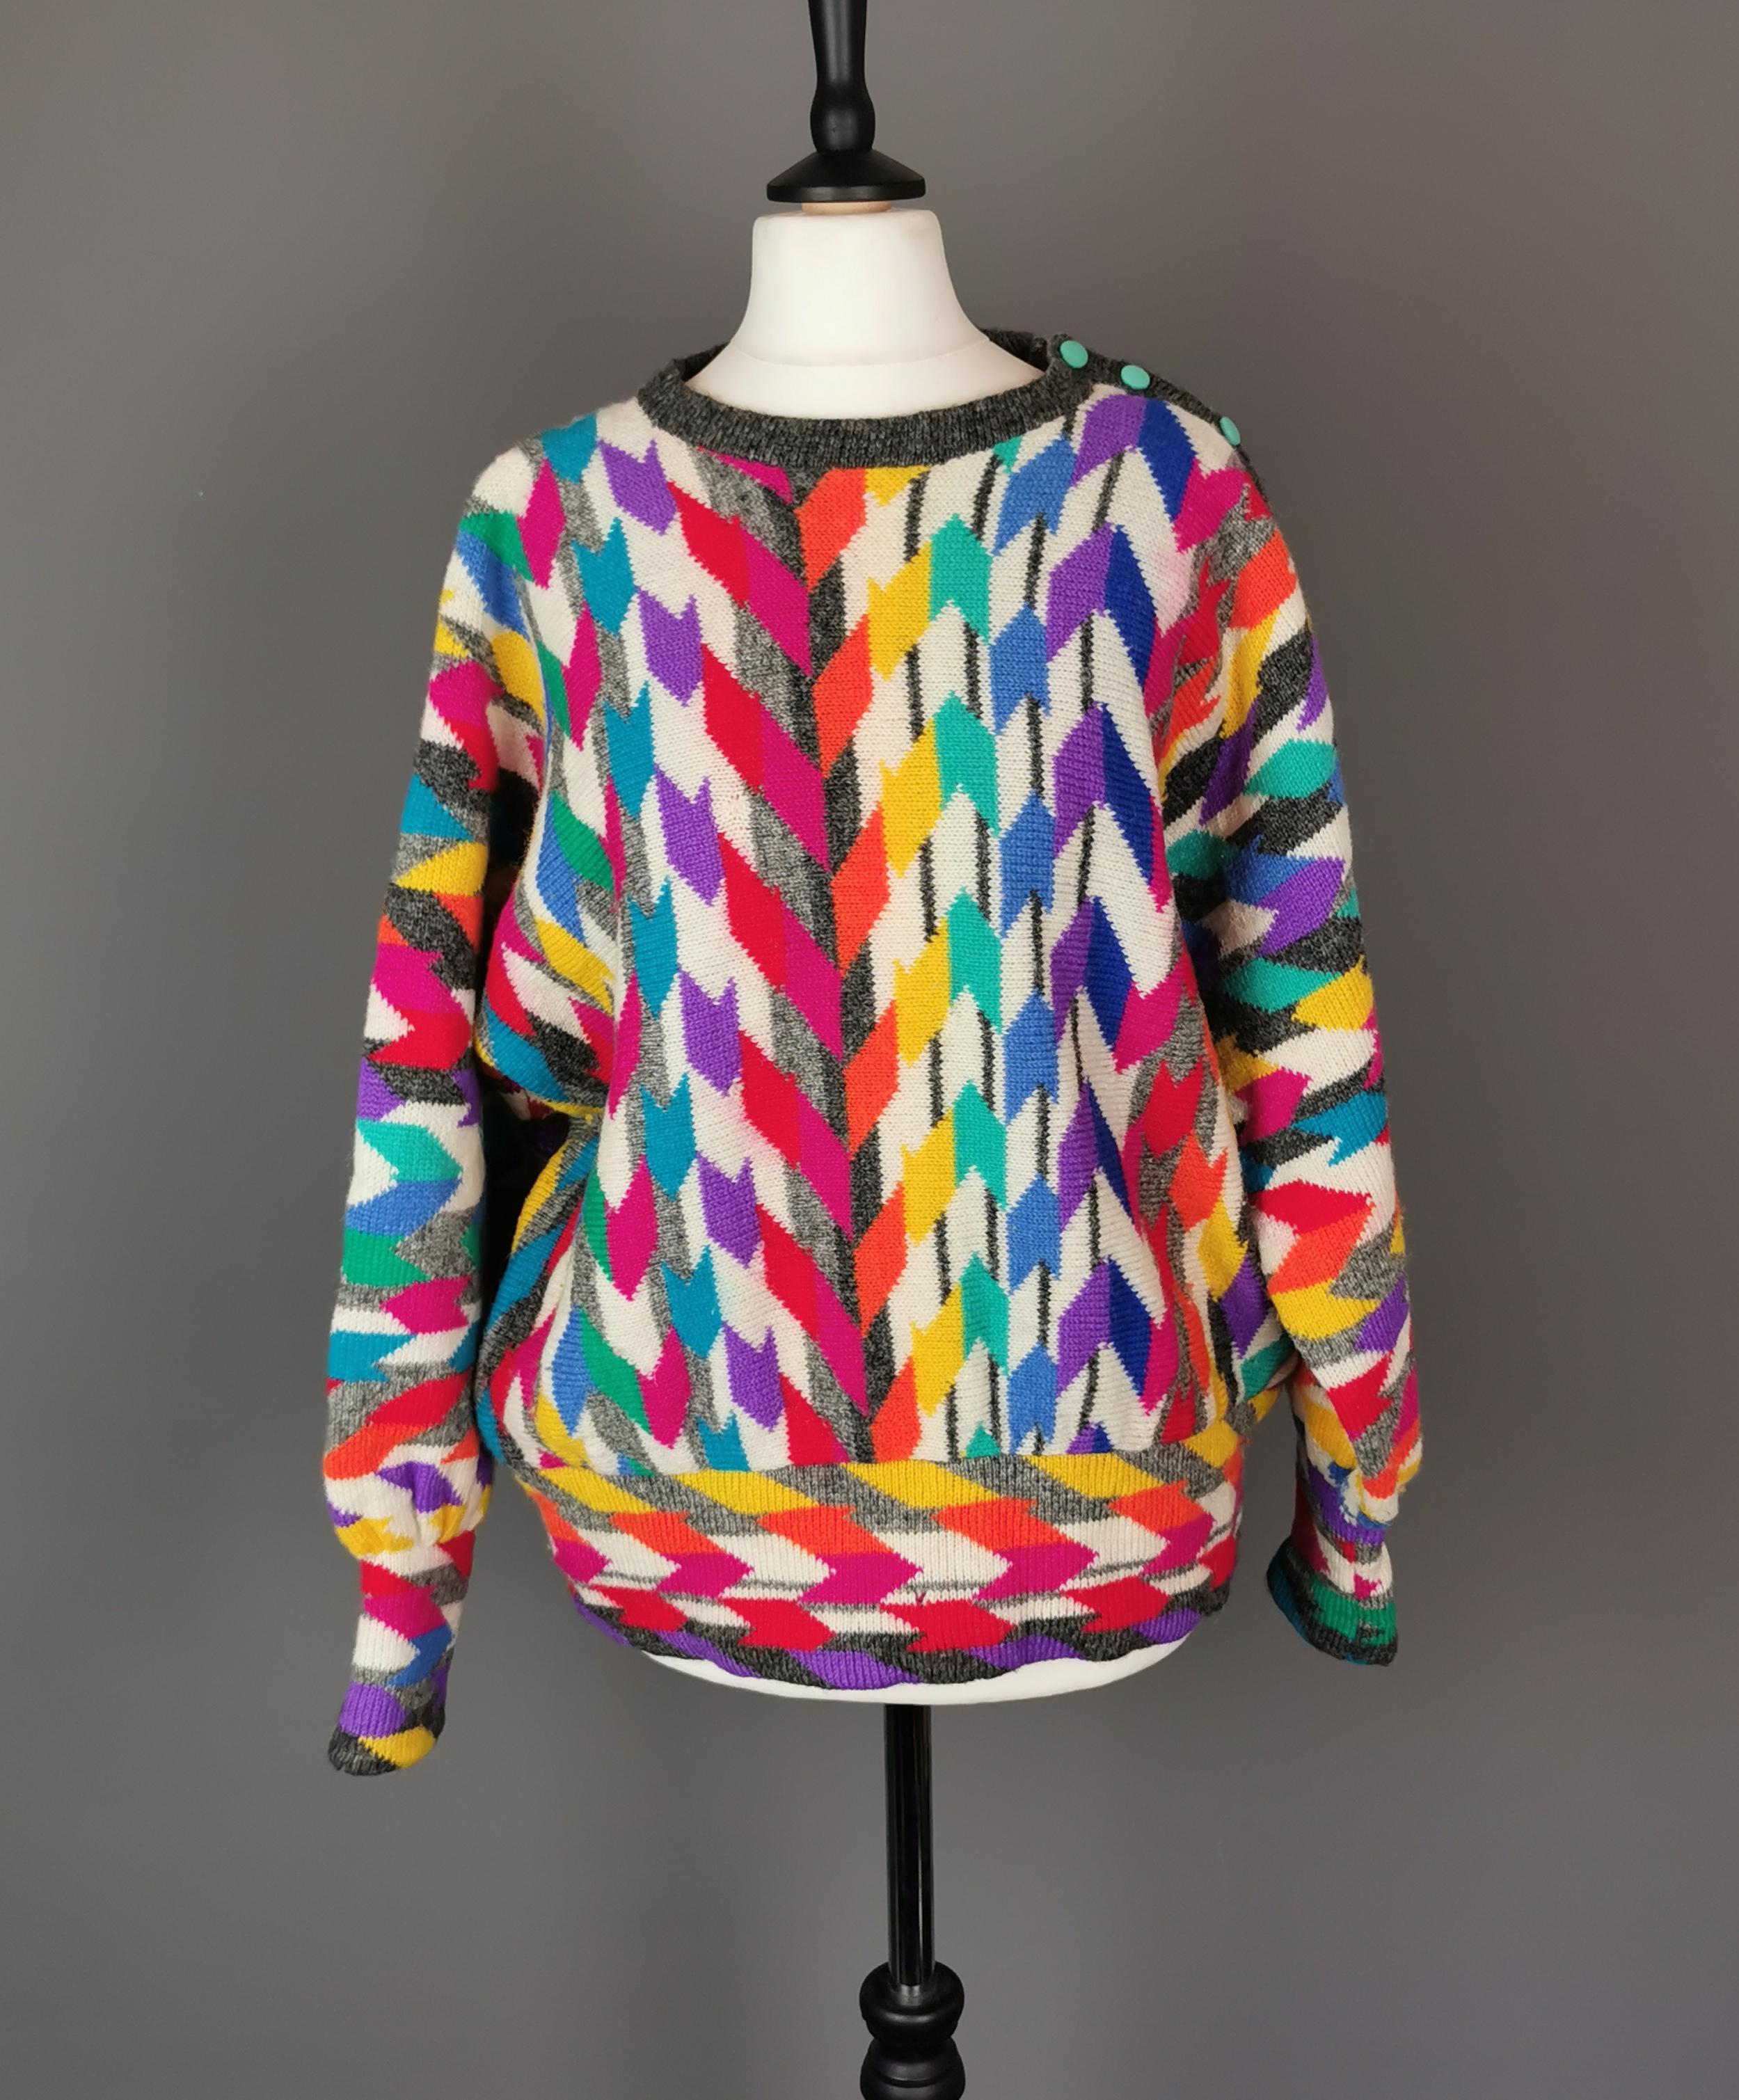 A rare vintage 1980s funky and colourful zig zag or chevron knit wool sweater or jumper.

This is the epitome of the 1980s and original 80s knitwear is in popular demand, this Maggie White design is extremely well made and super wearable